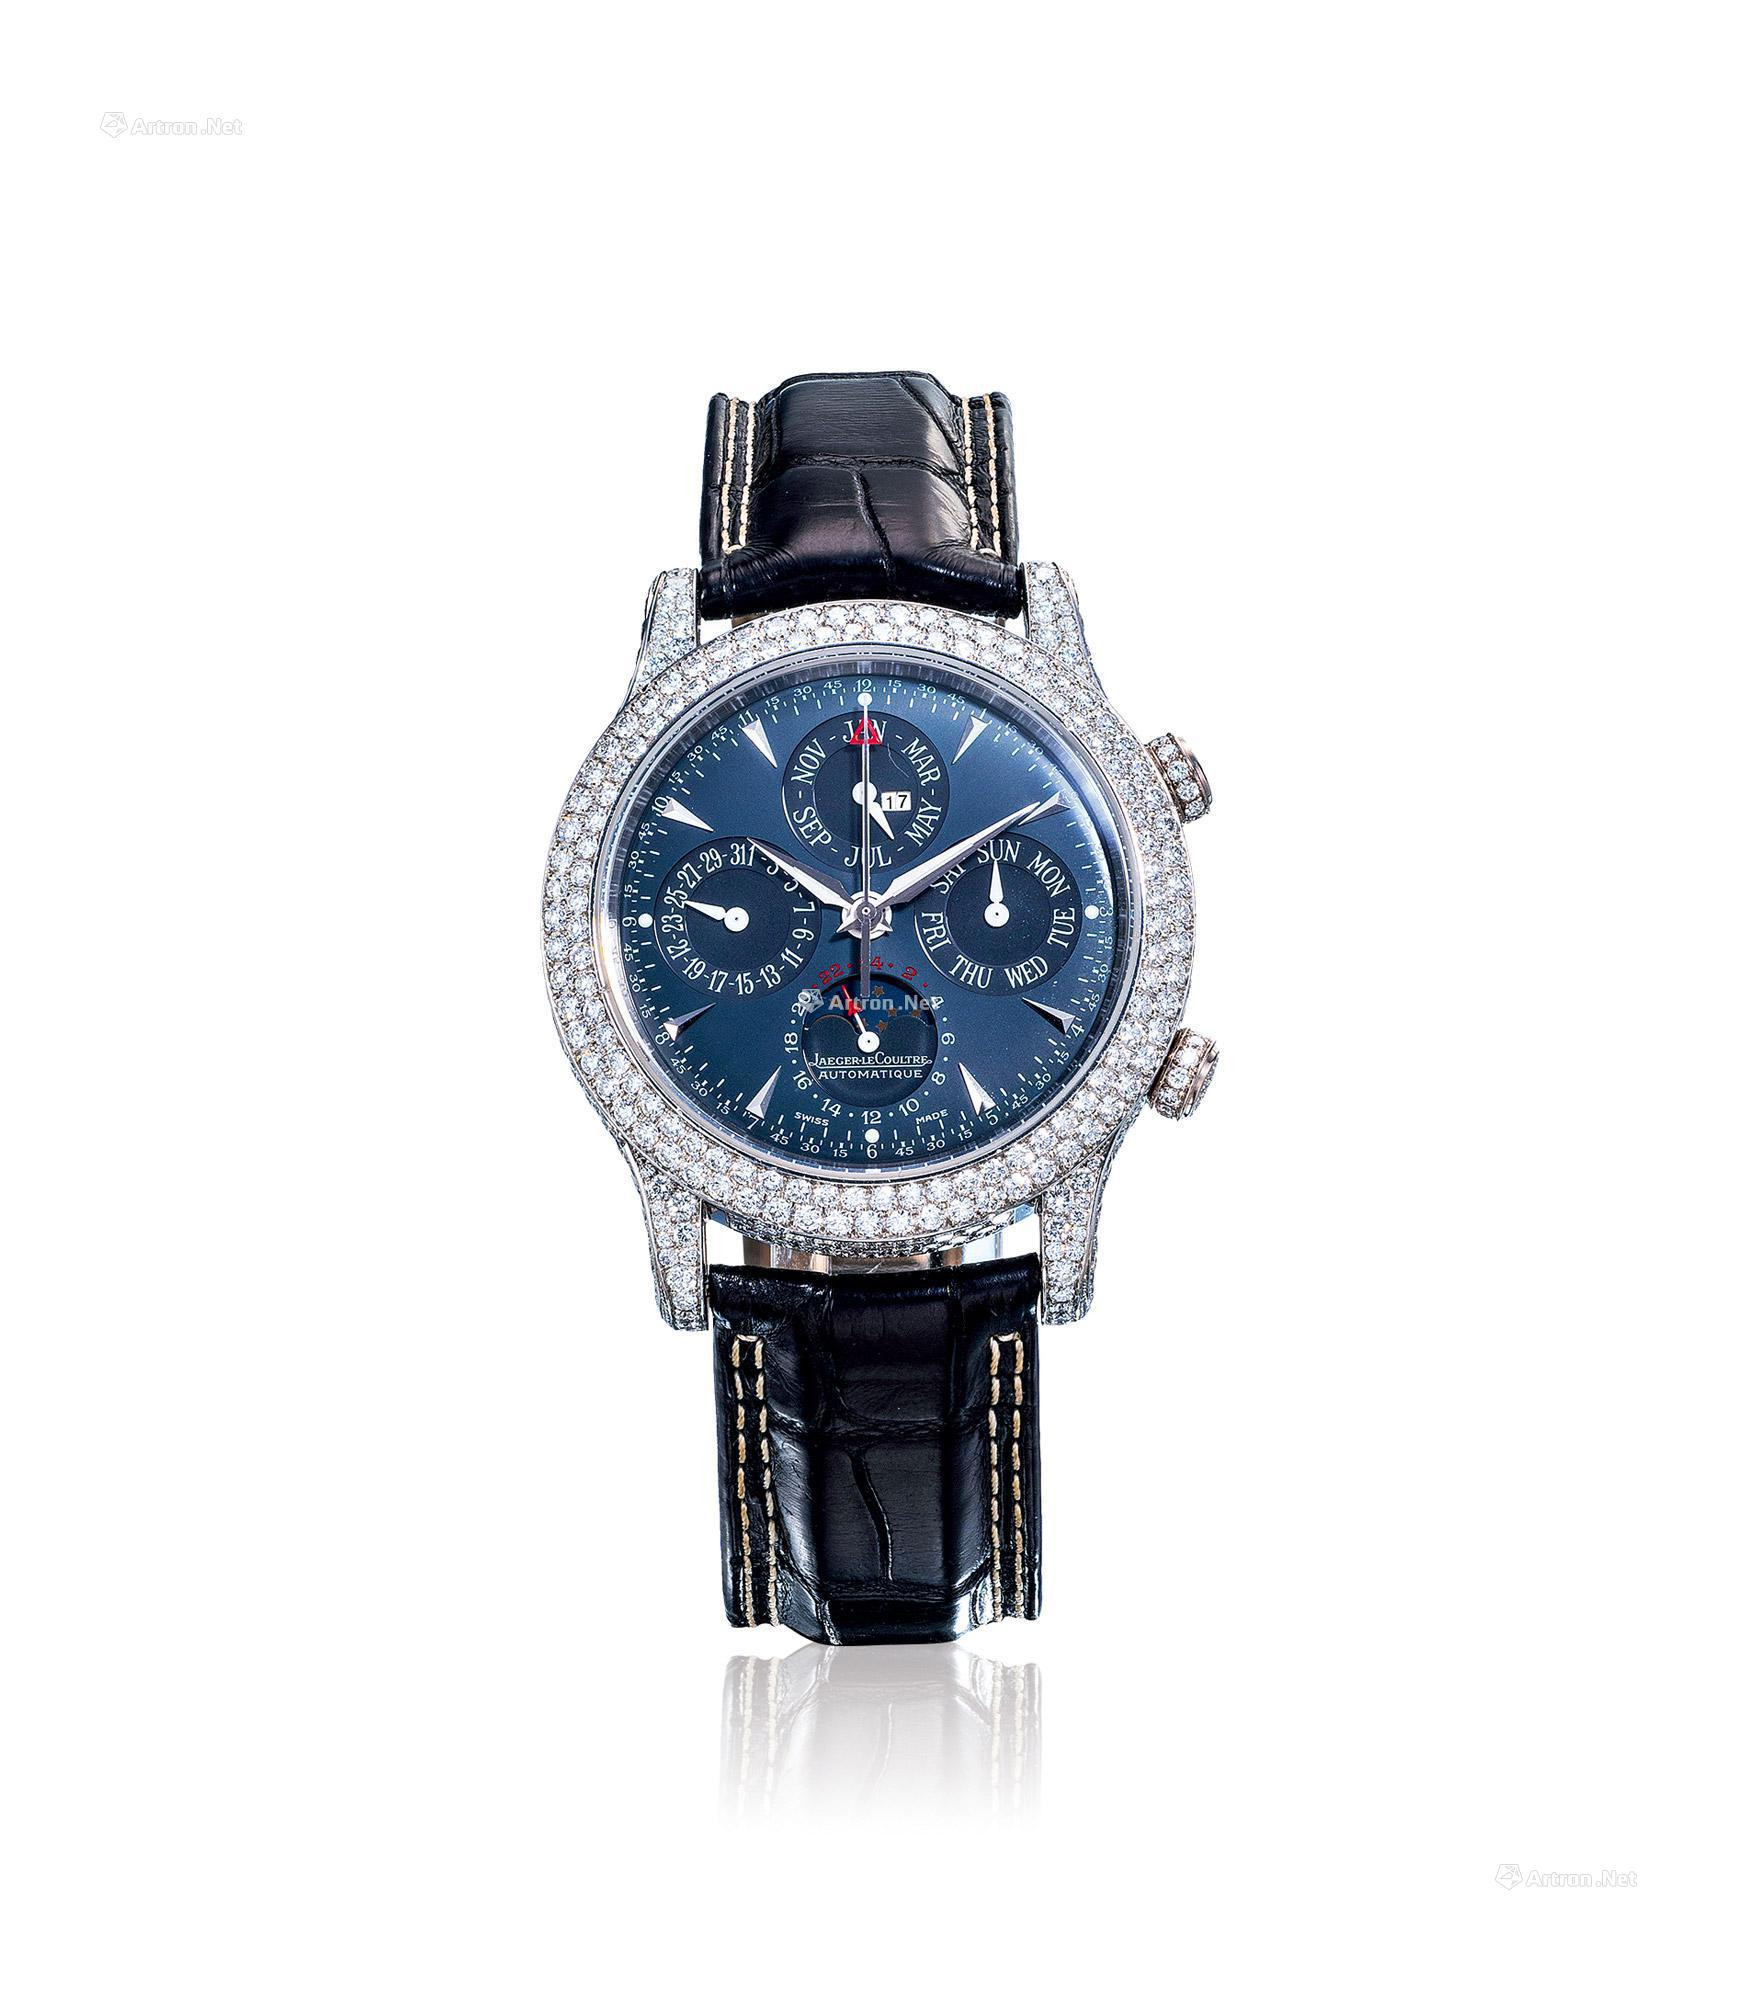 JAEGER-LECOULTRE  A VERY FINE LIMITED EDITION PLATINUM AND DIAMOND-SET PERPETUAL CALENDAR AUTOMATIC WRISTWATCH， WITH ALARM， DATE， DAY， MONTH， YEAR， 24-HOUR AND MOON PHASES INDICATORS， CERTIFICATE OF ORIGIN AND PRESENTATION BOX